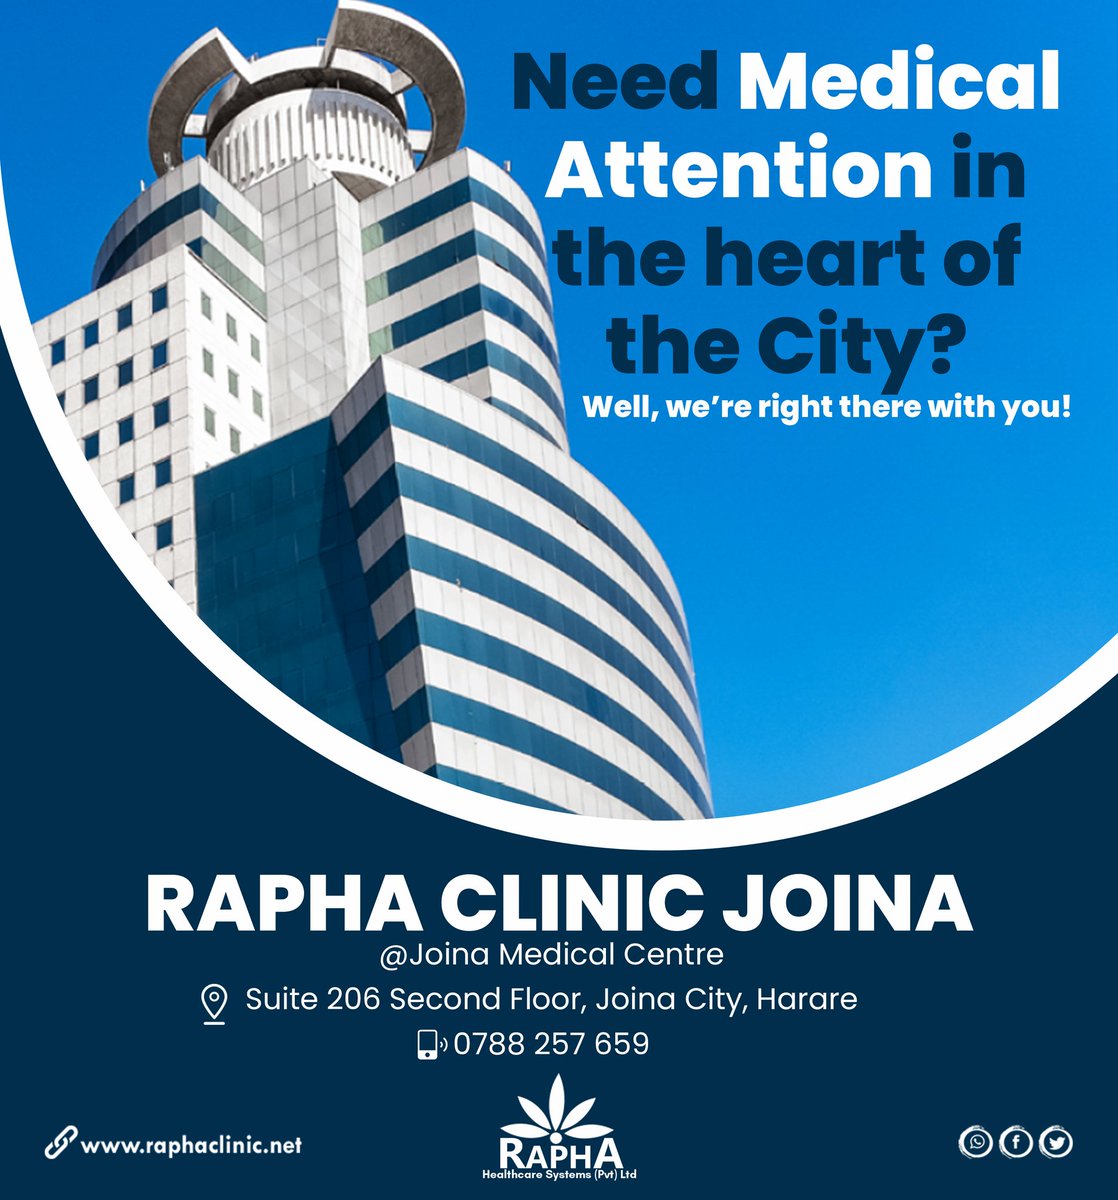 When you need Medical Services in the CBD... just walk in on us or call 0788257659

#RaphaJoina #Clinic #Healthcare #medicalservices #Healthcare #HealthCareServices #hospital  #CBD #Harare #SunshineCity #Emmergency #medicalemergency  #JoinaCity  #RaphaCares